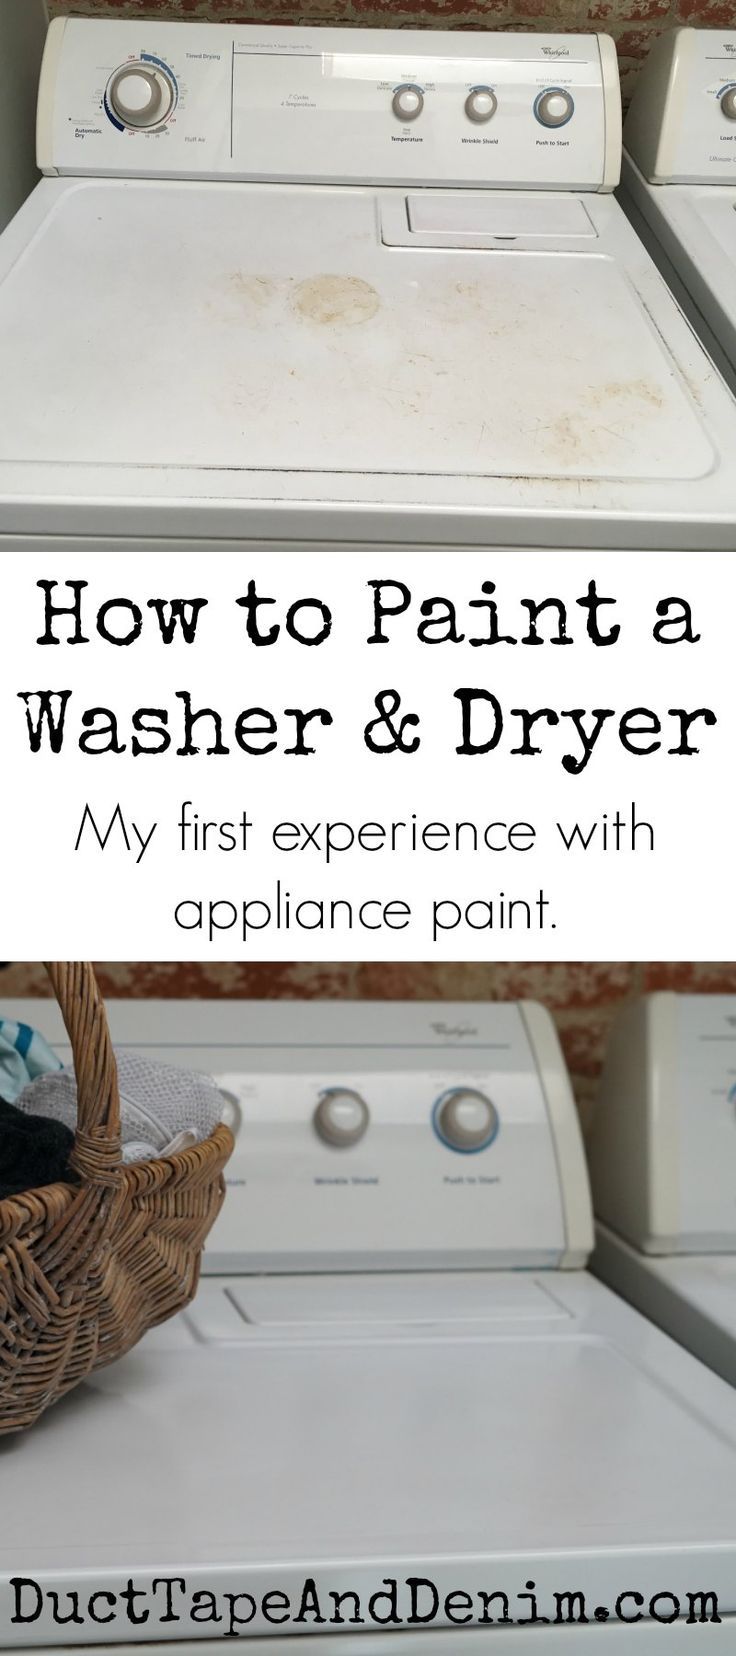 How to paint a washer and dryer. My first experience with appliance paint. Washi...